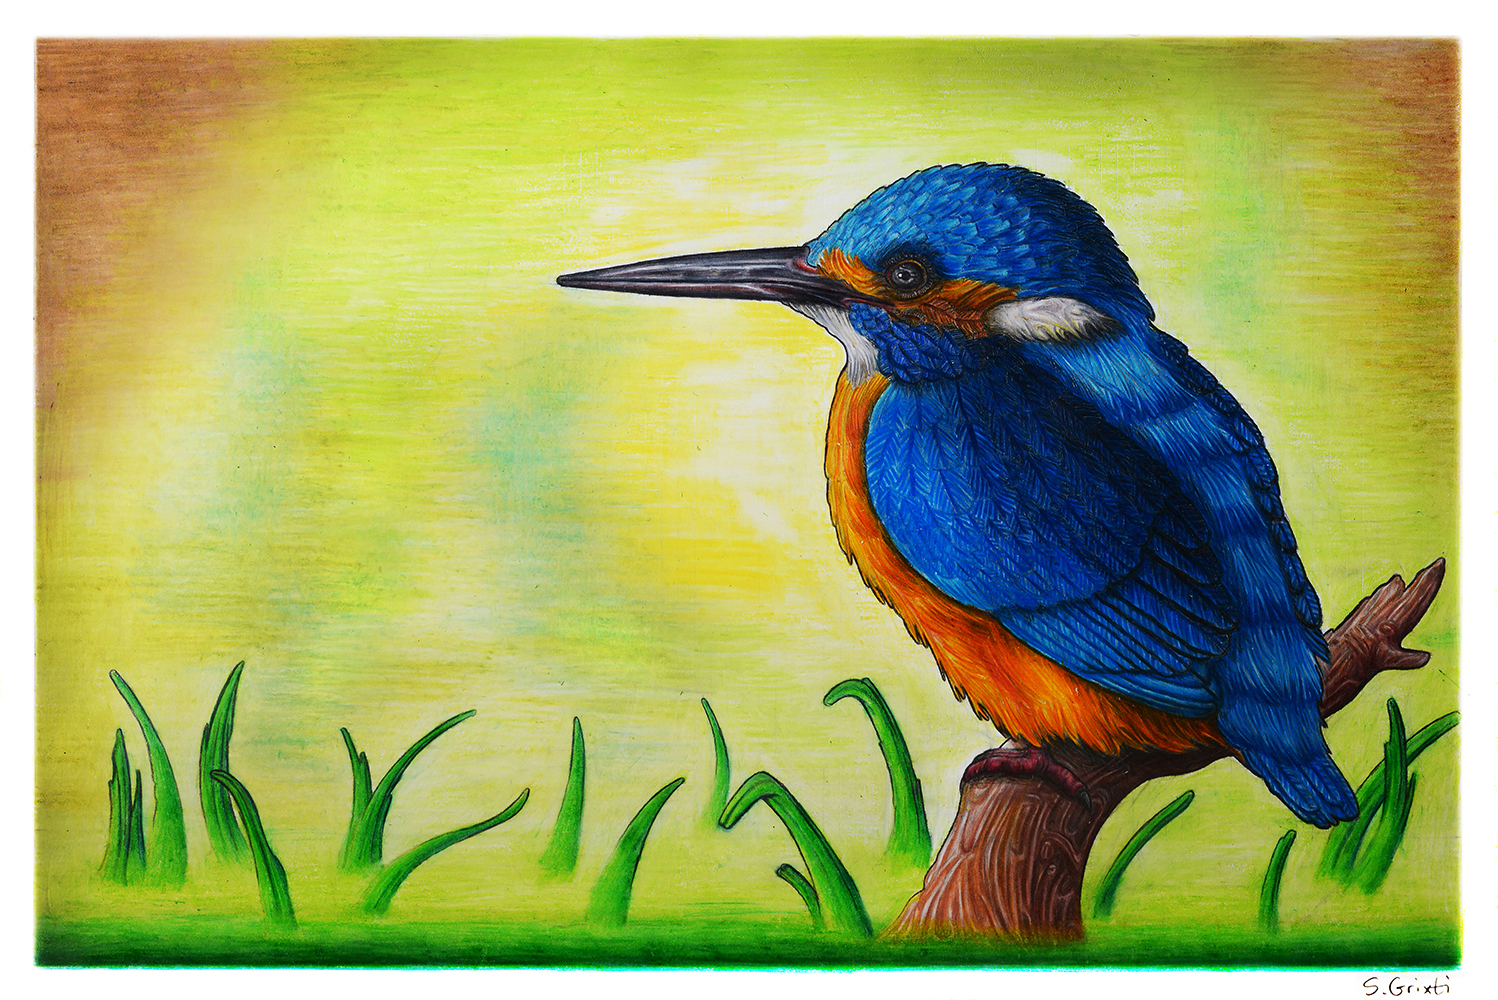 Kingfisher bird uniqueness and significance images